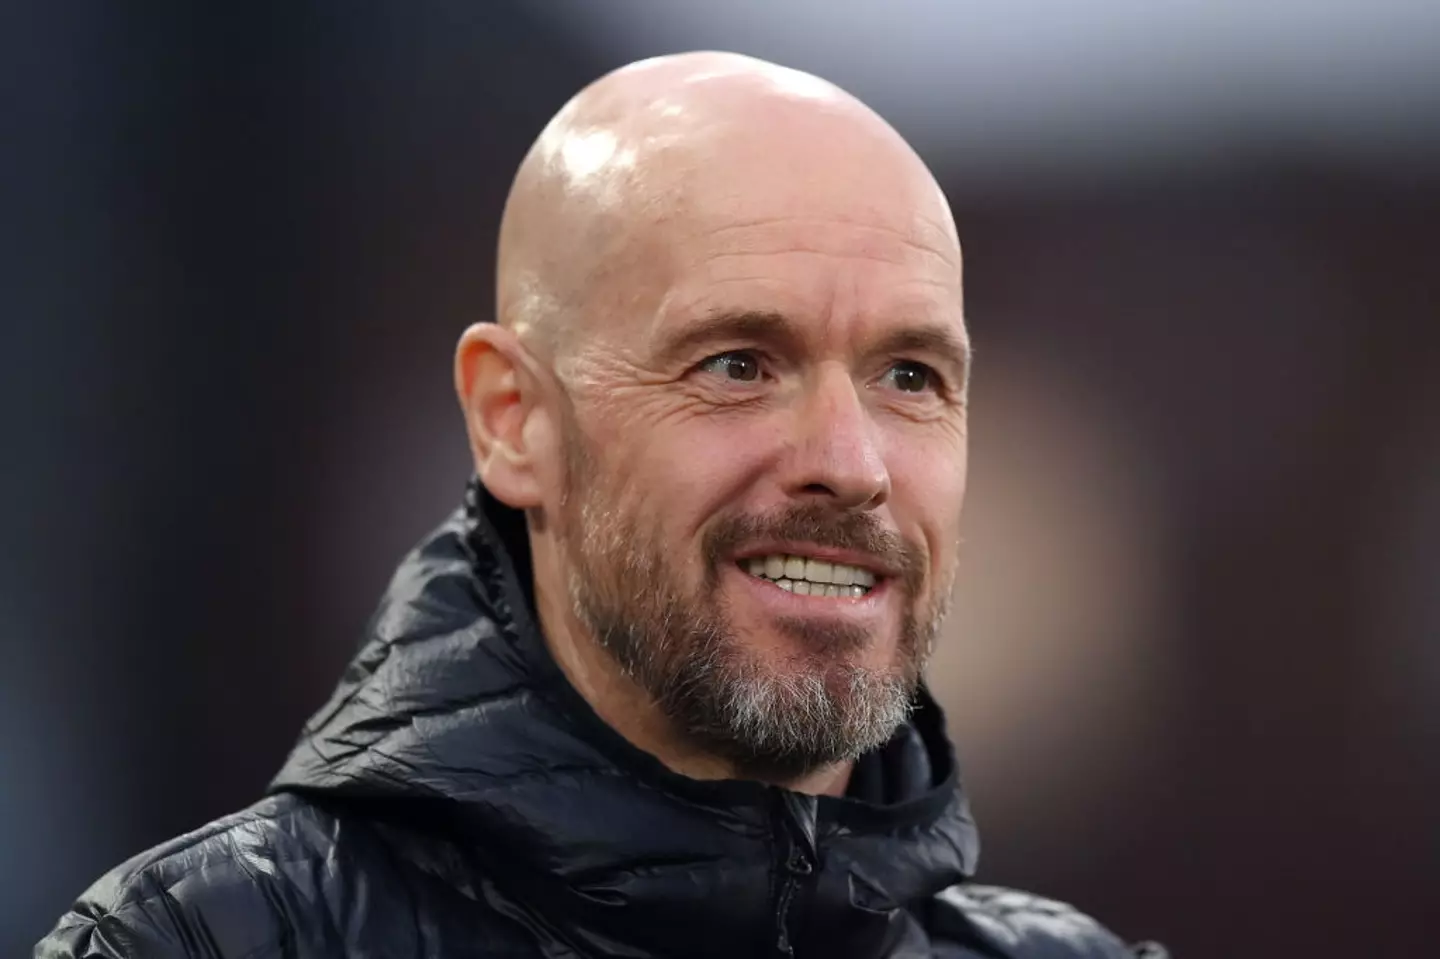 Ten Hag's United next face Arsenal in the Premier League (Image: Getty)